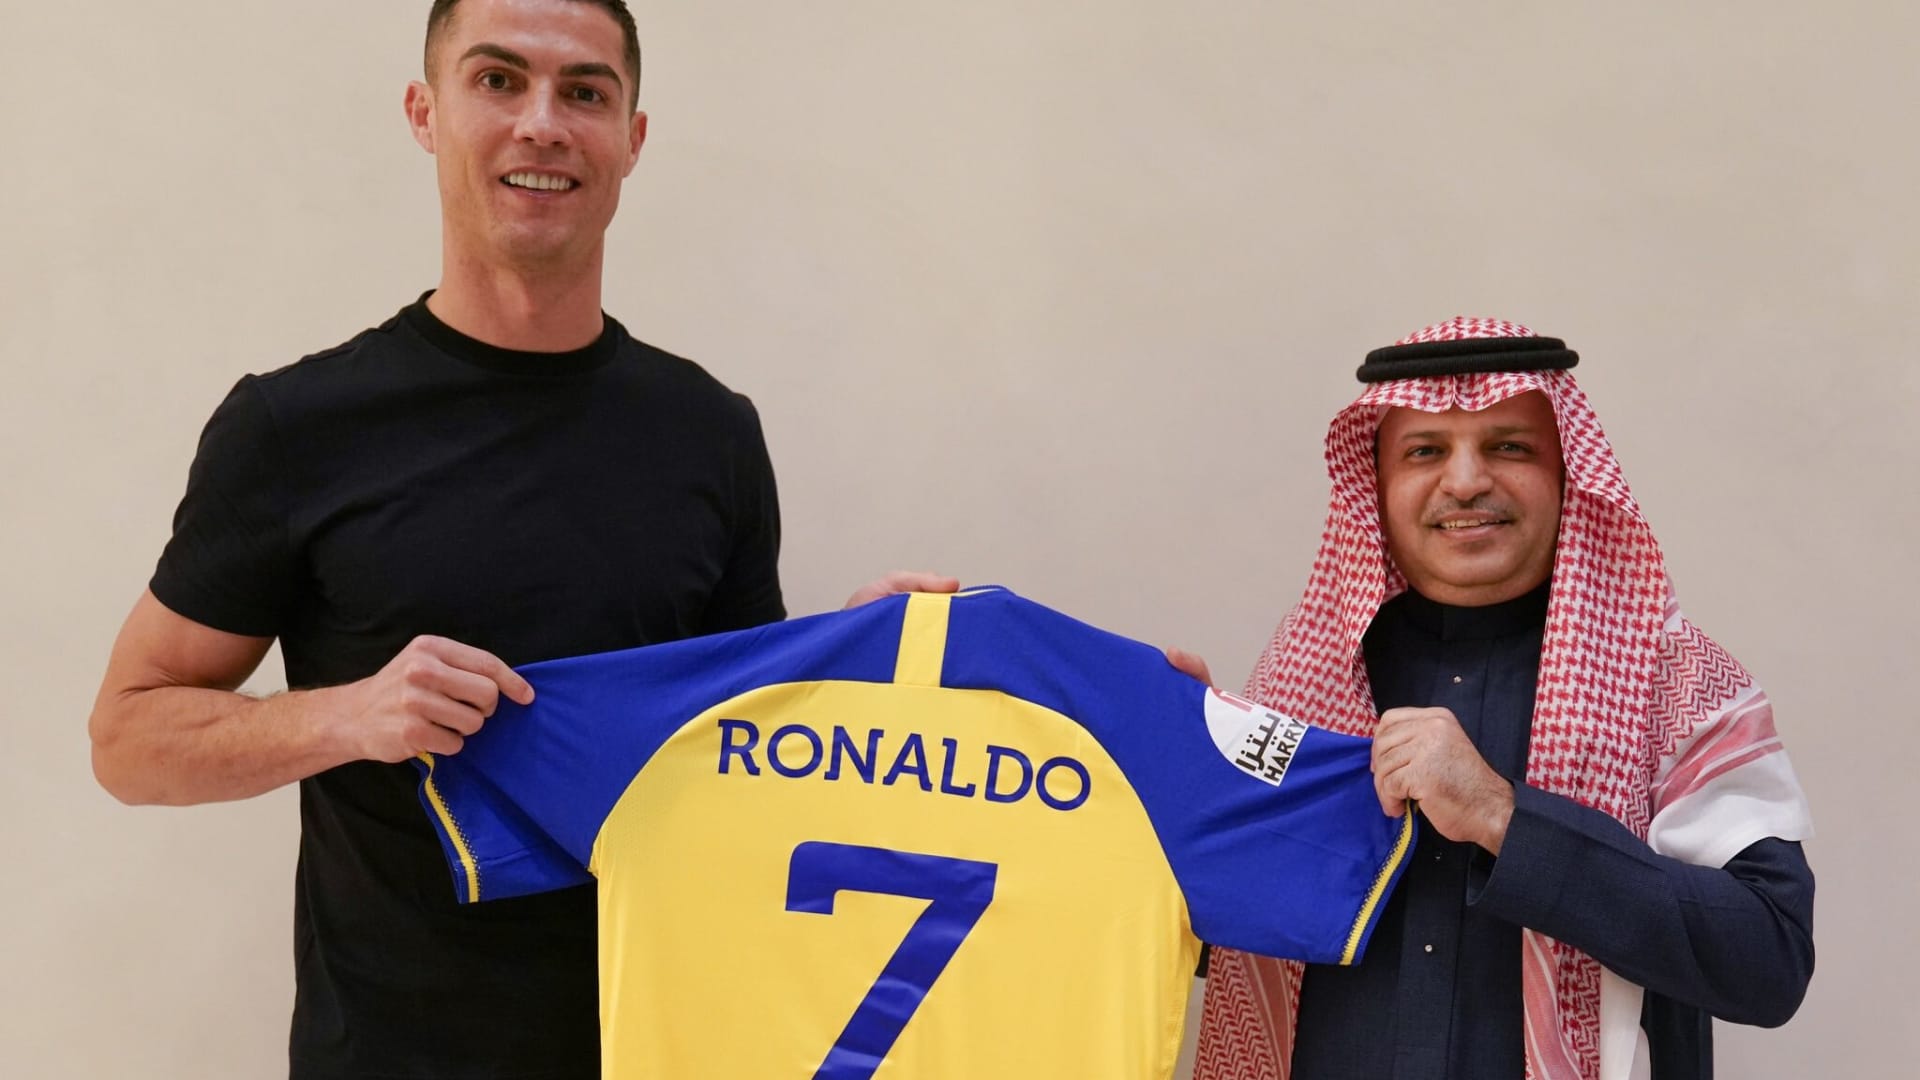 Portuguese football star Cristiano Ronaldo poses for a photo with the jersey after signing with Saudi Arabia's Al-Nassr Football Club in Riyadh, Saudi Arabia on December 30, 2022.